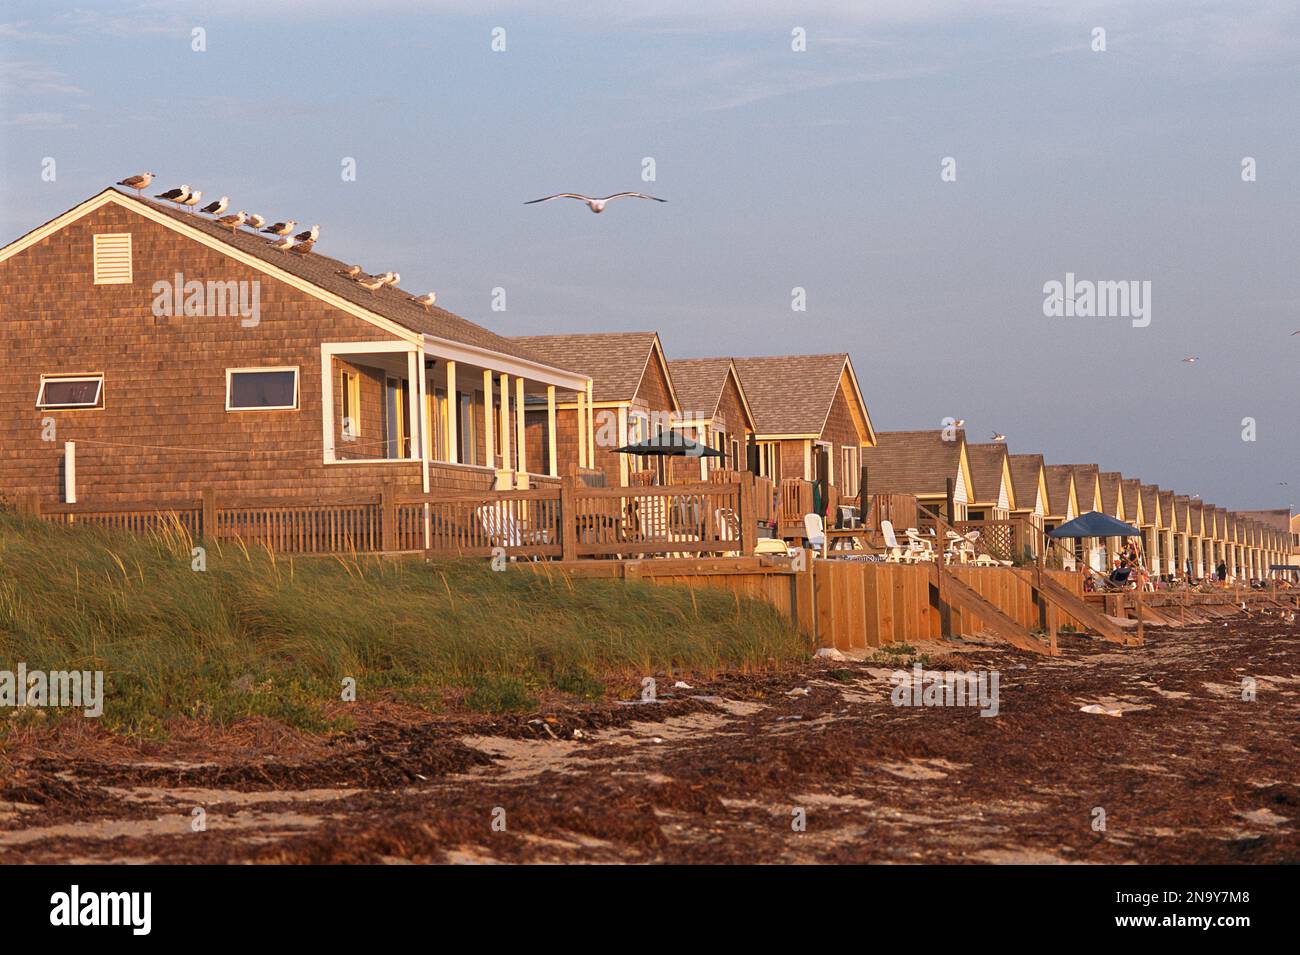 A row of rental cottages on a seaweed strewn beach.; Truro, Cape Cod, Massachusetts. Stock Photo